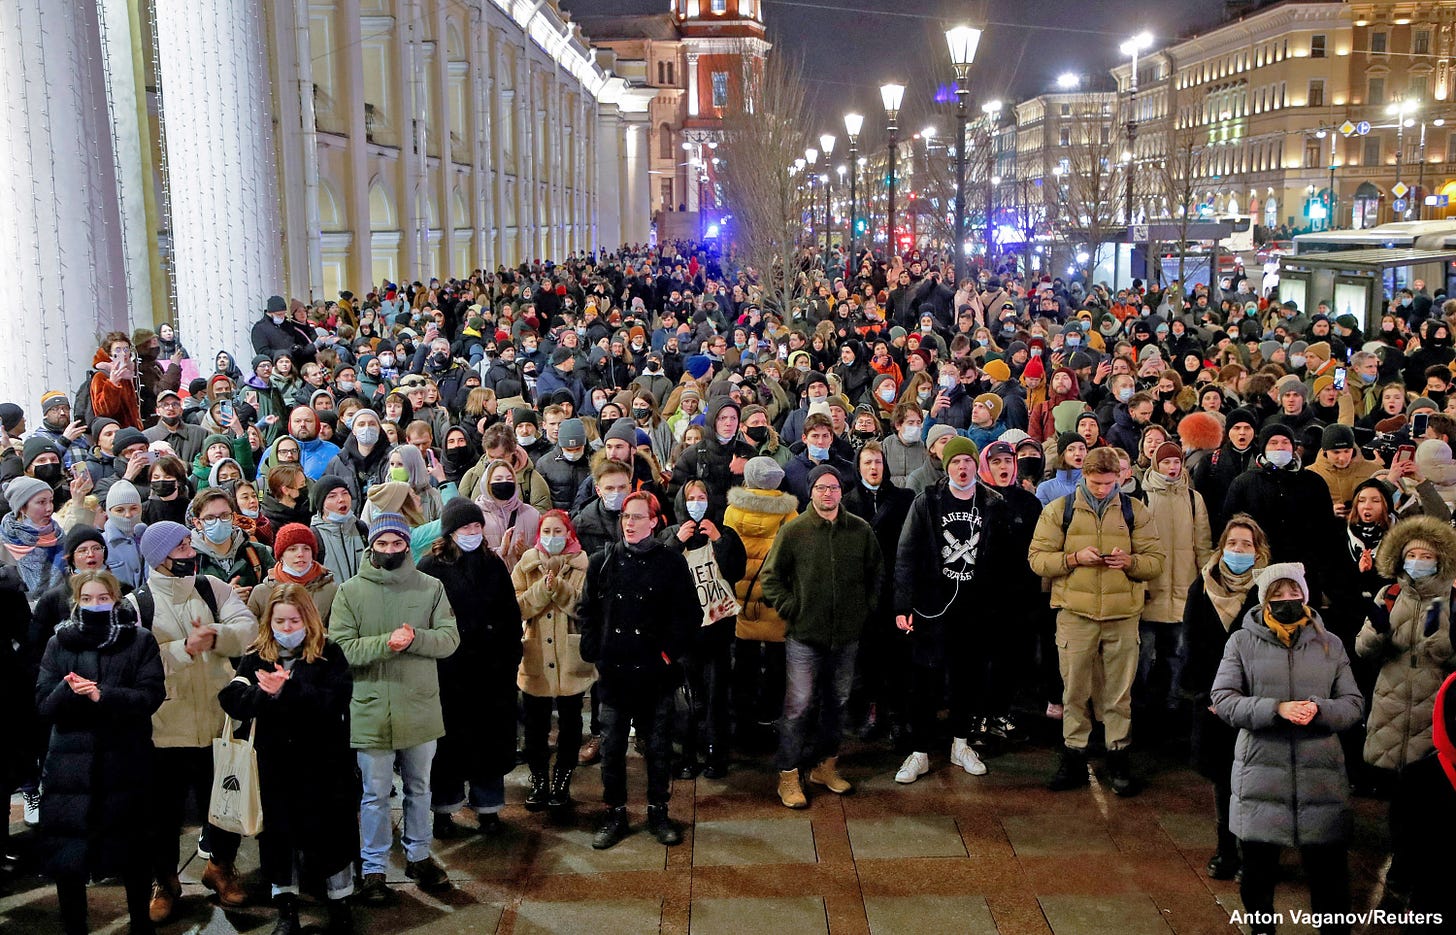 Thousands of Russians attend an anti-war protest, opposing the actions in Ukraine.